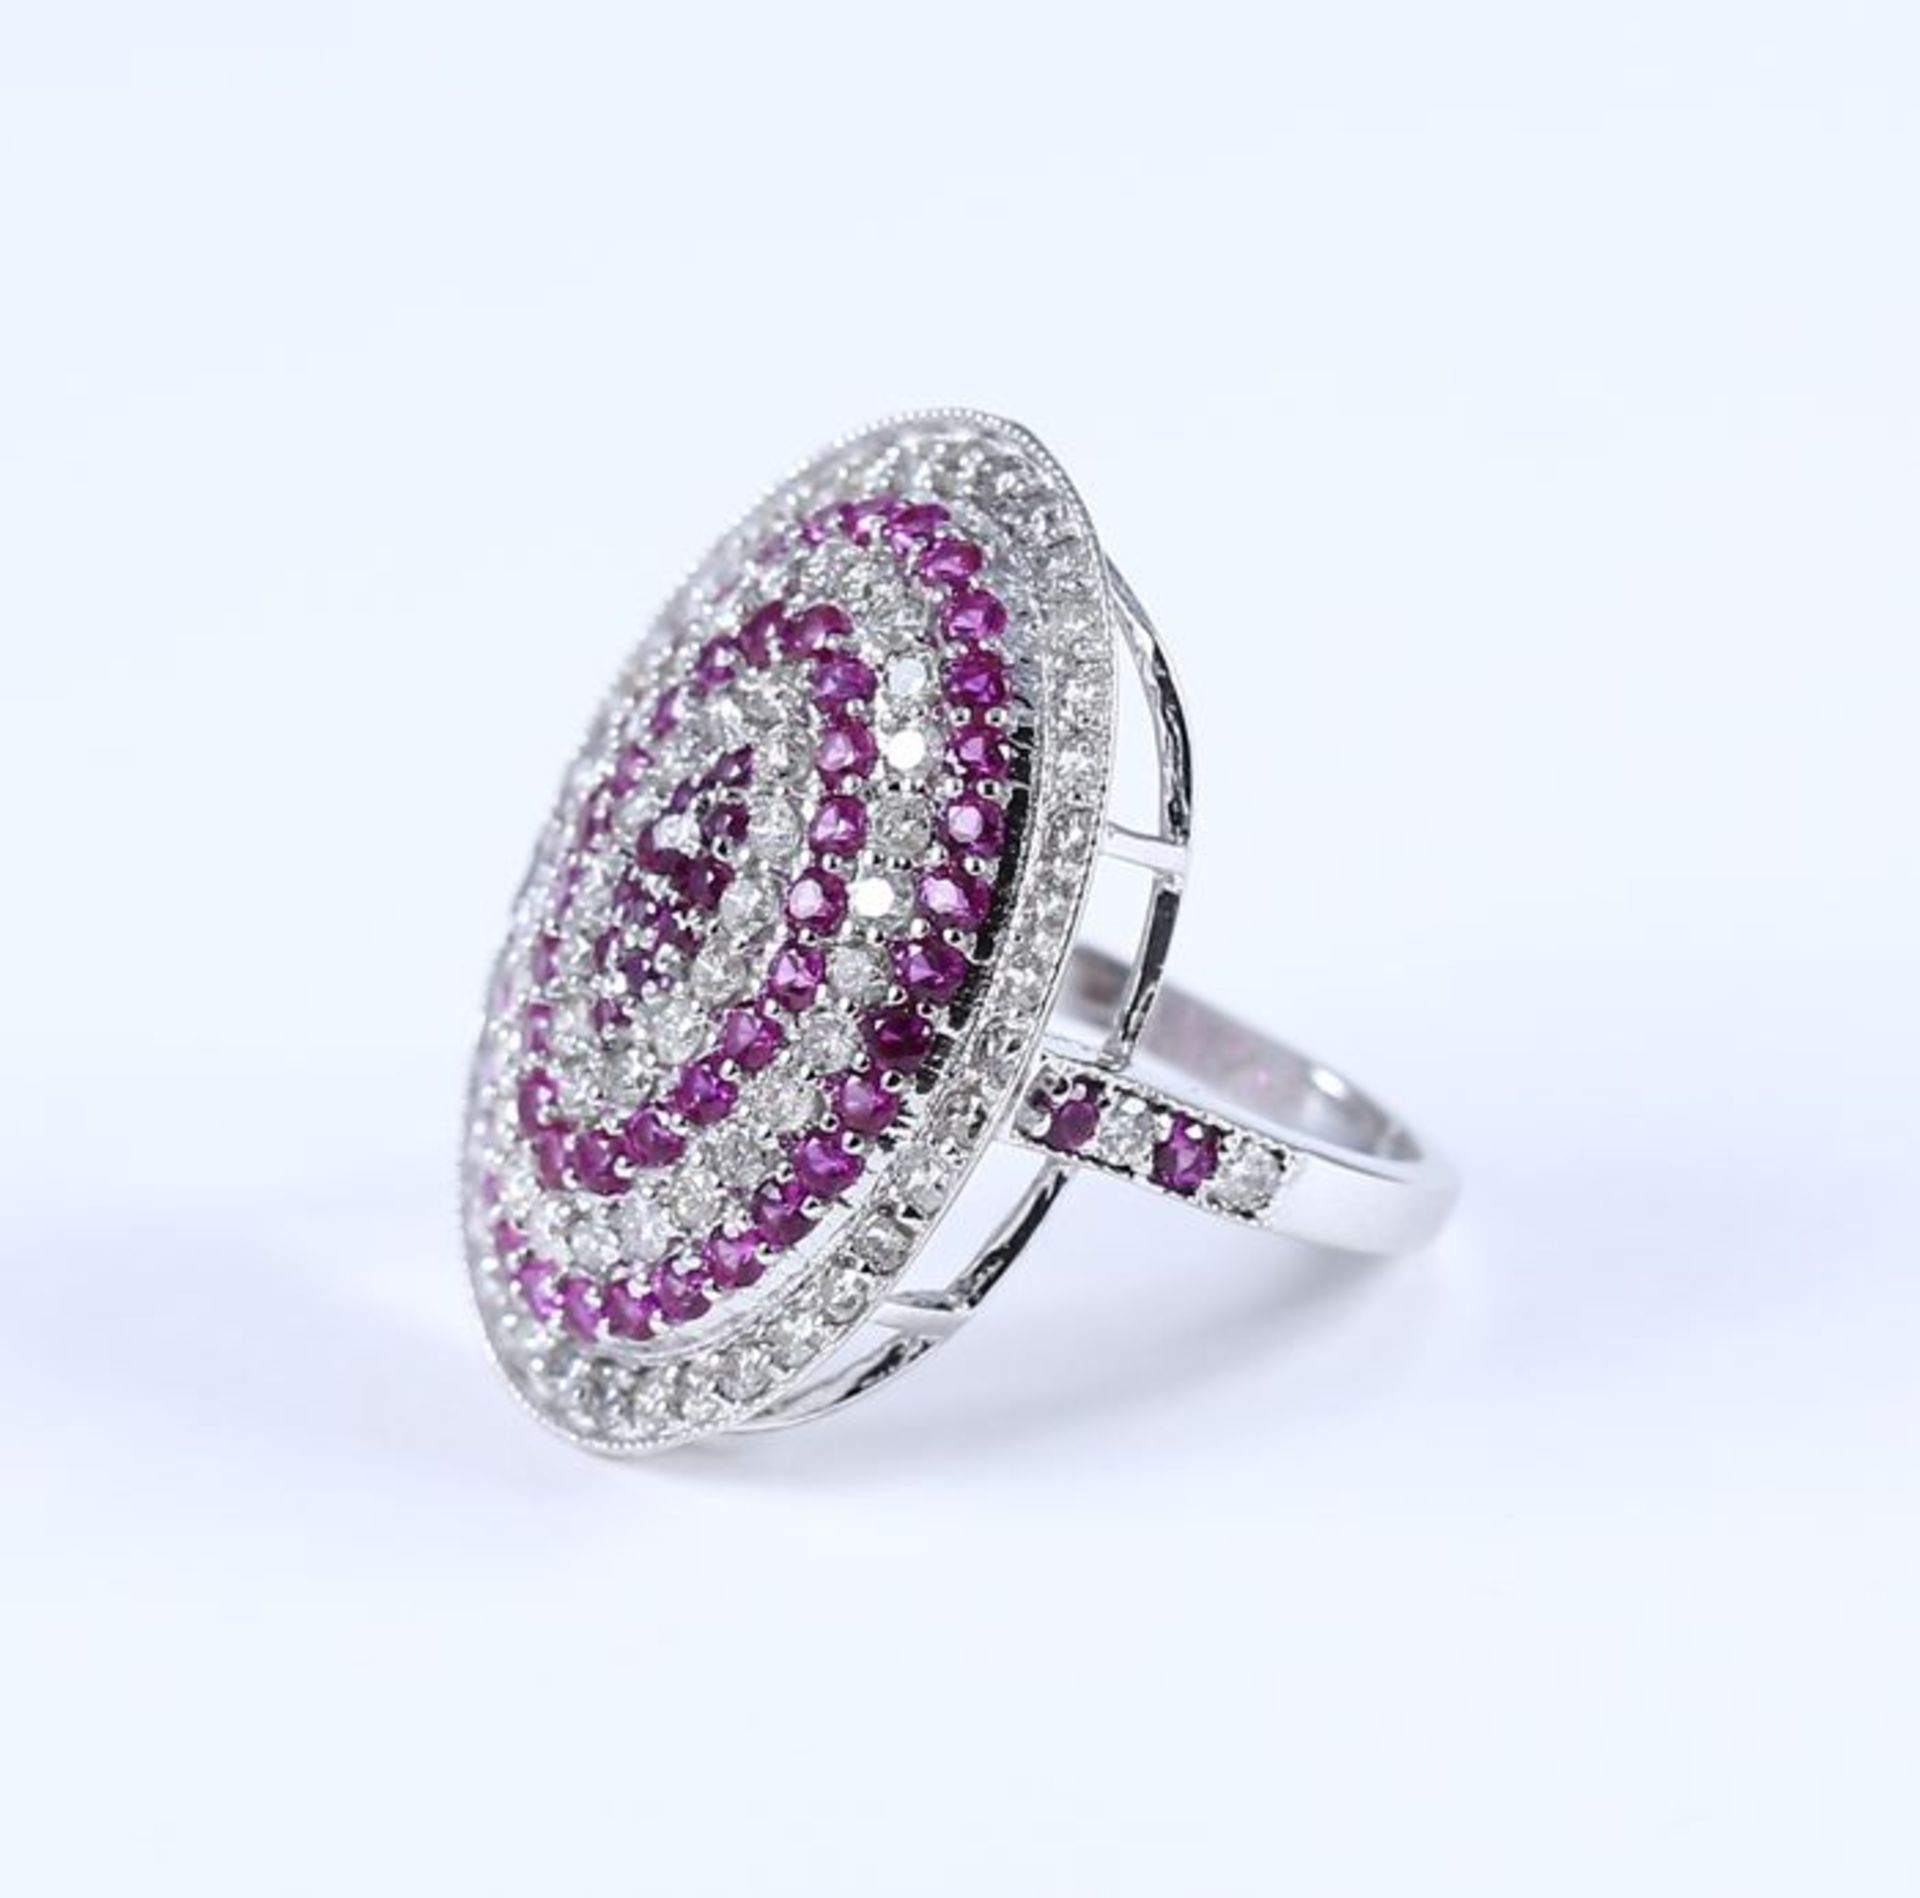 14 K / 585 Very Exclusive White Gold Diamond and Ruby Ring - Image 5 of 10